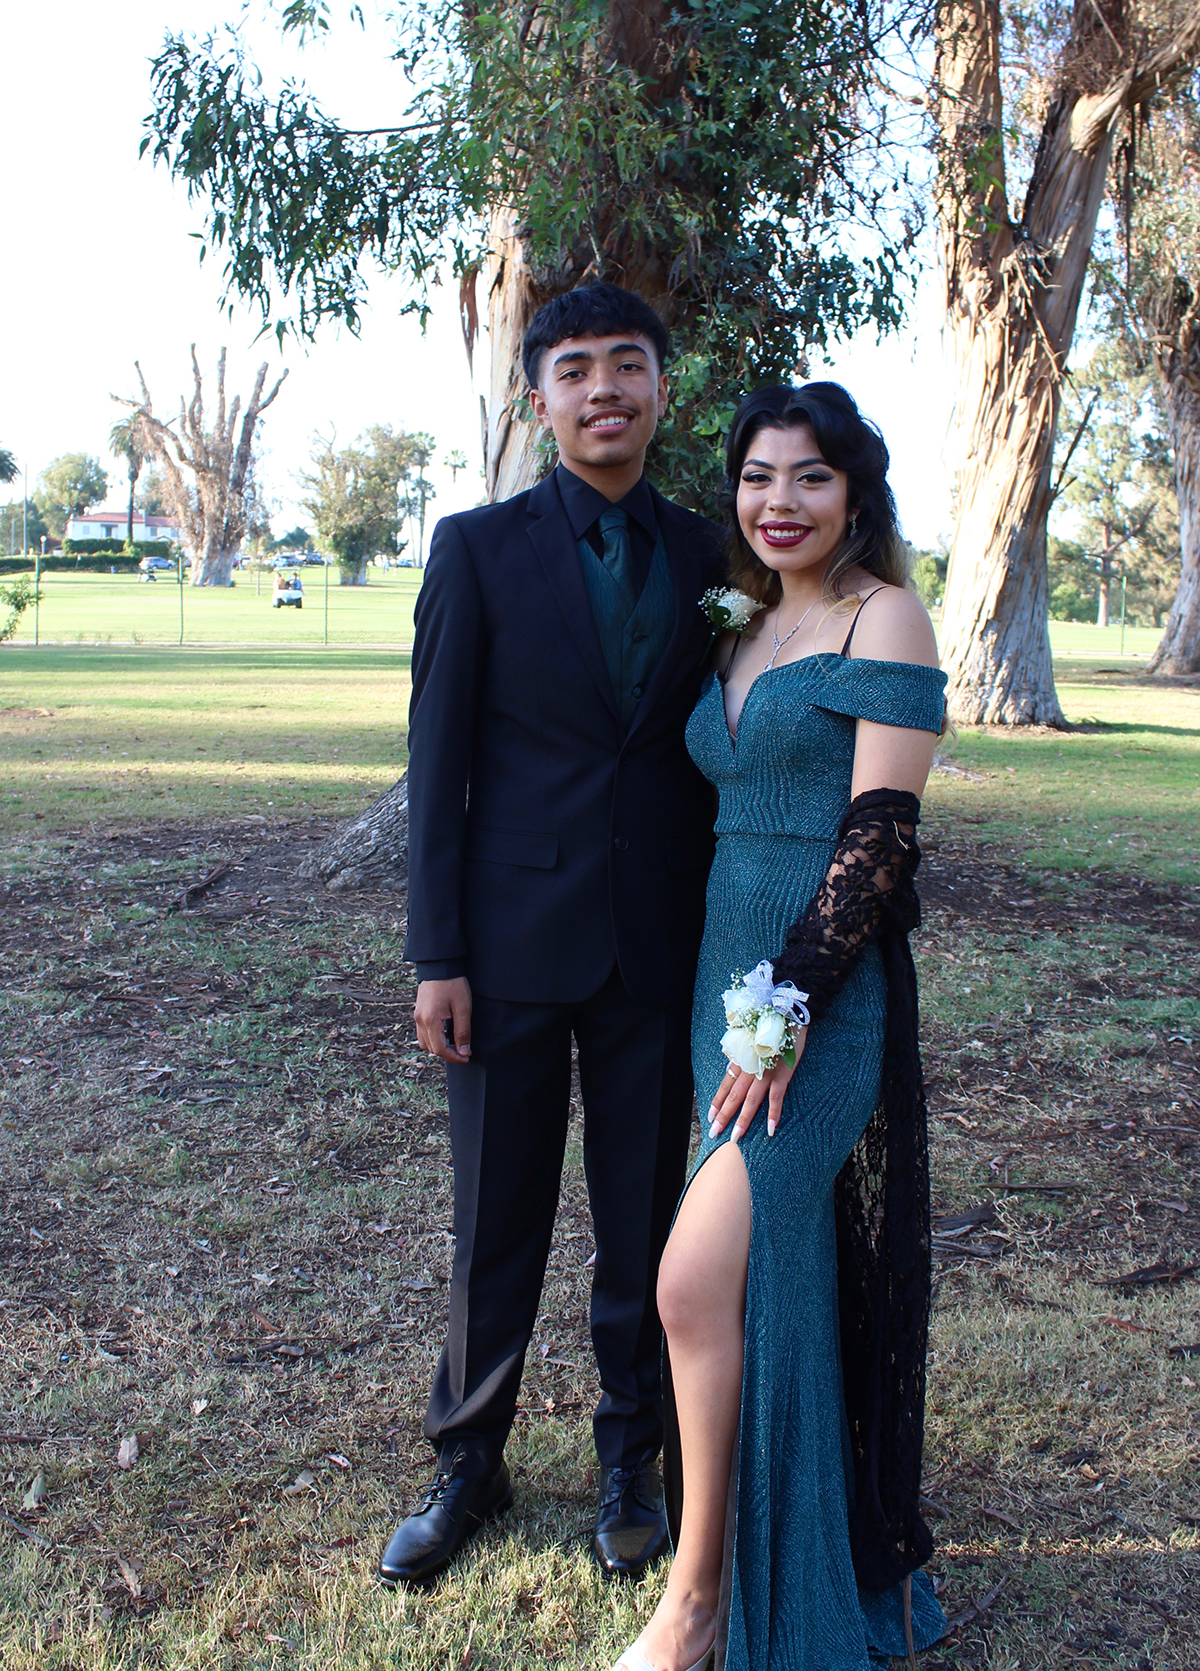 Tania Johns looking gorgeous for the Carson High's prom